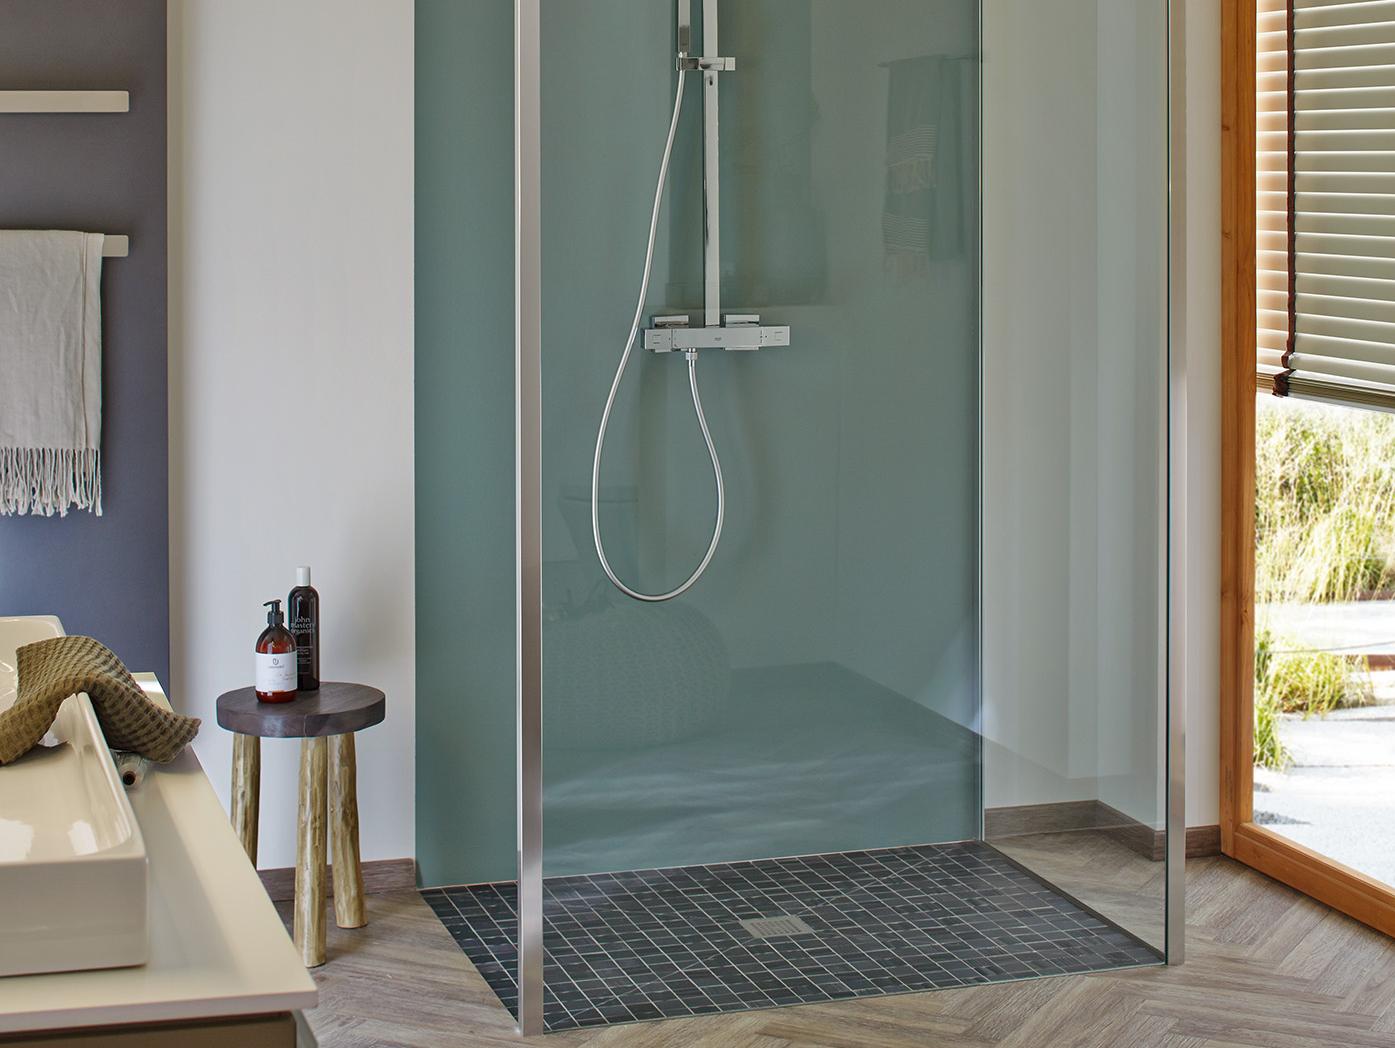 Kermi shower board with POINT point drain, POINT in combination with customizable shower enclosure solutions